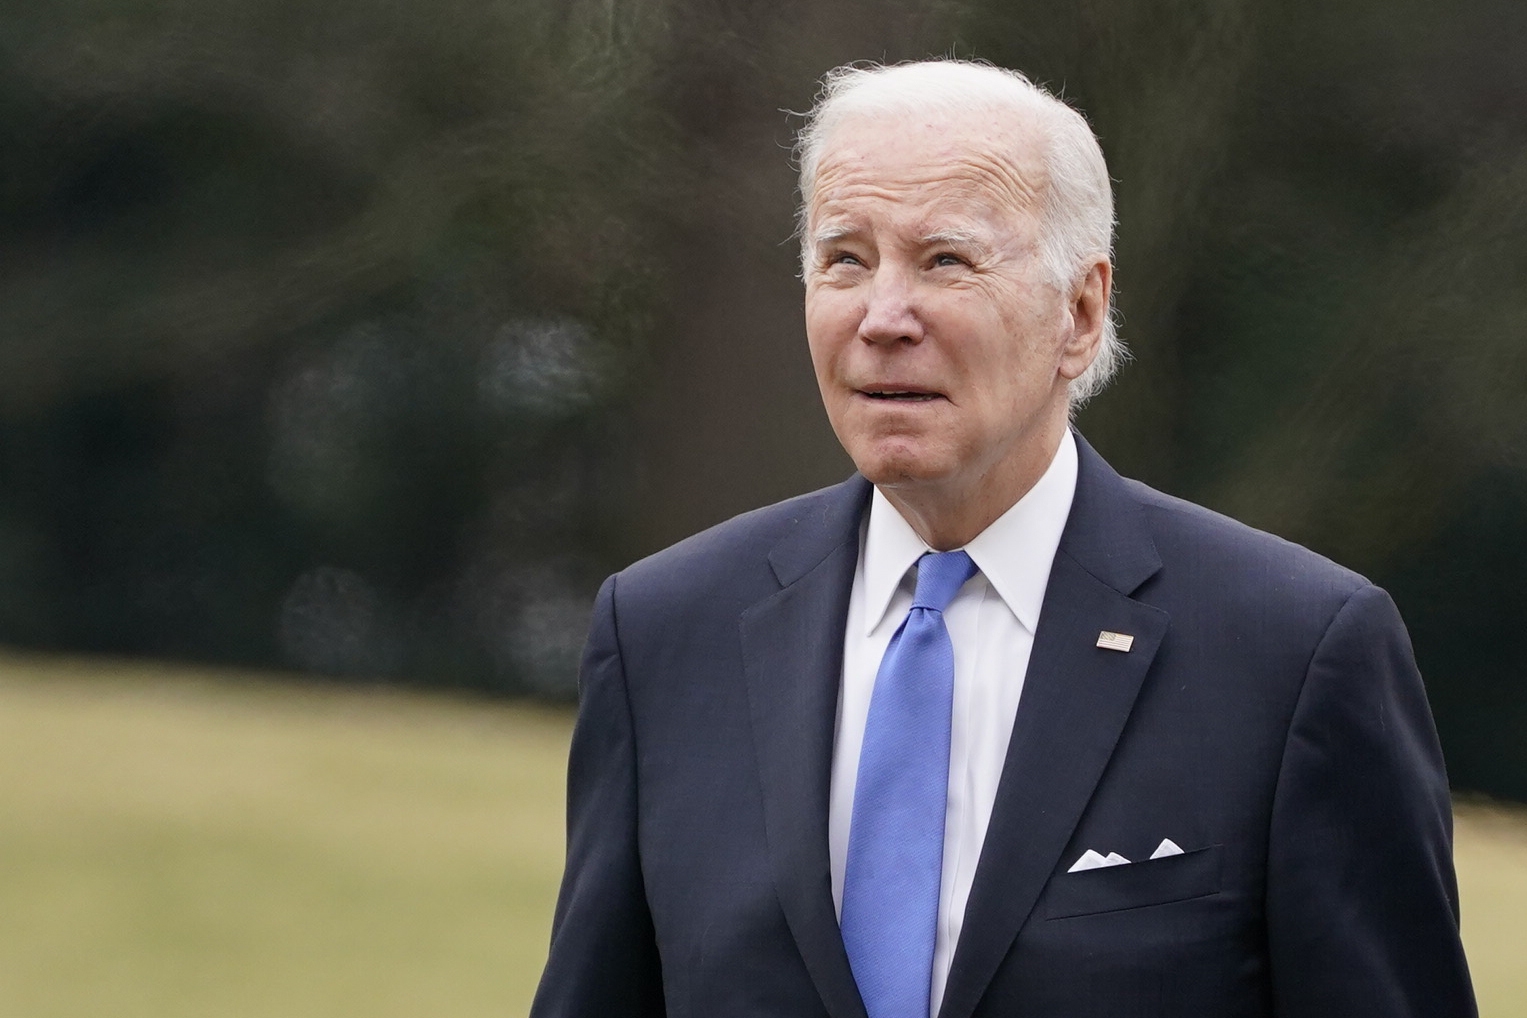 Legal, political strategy in letting FBI search Biden’s home